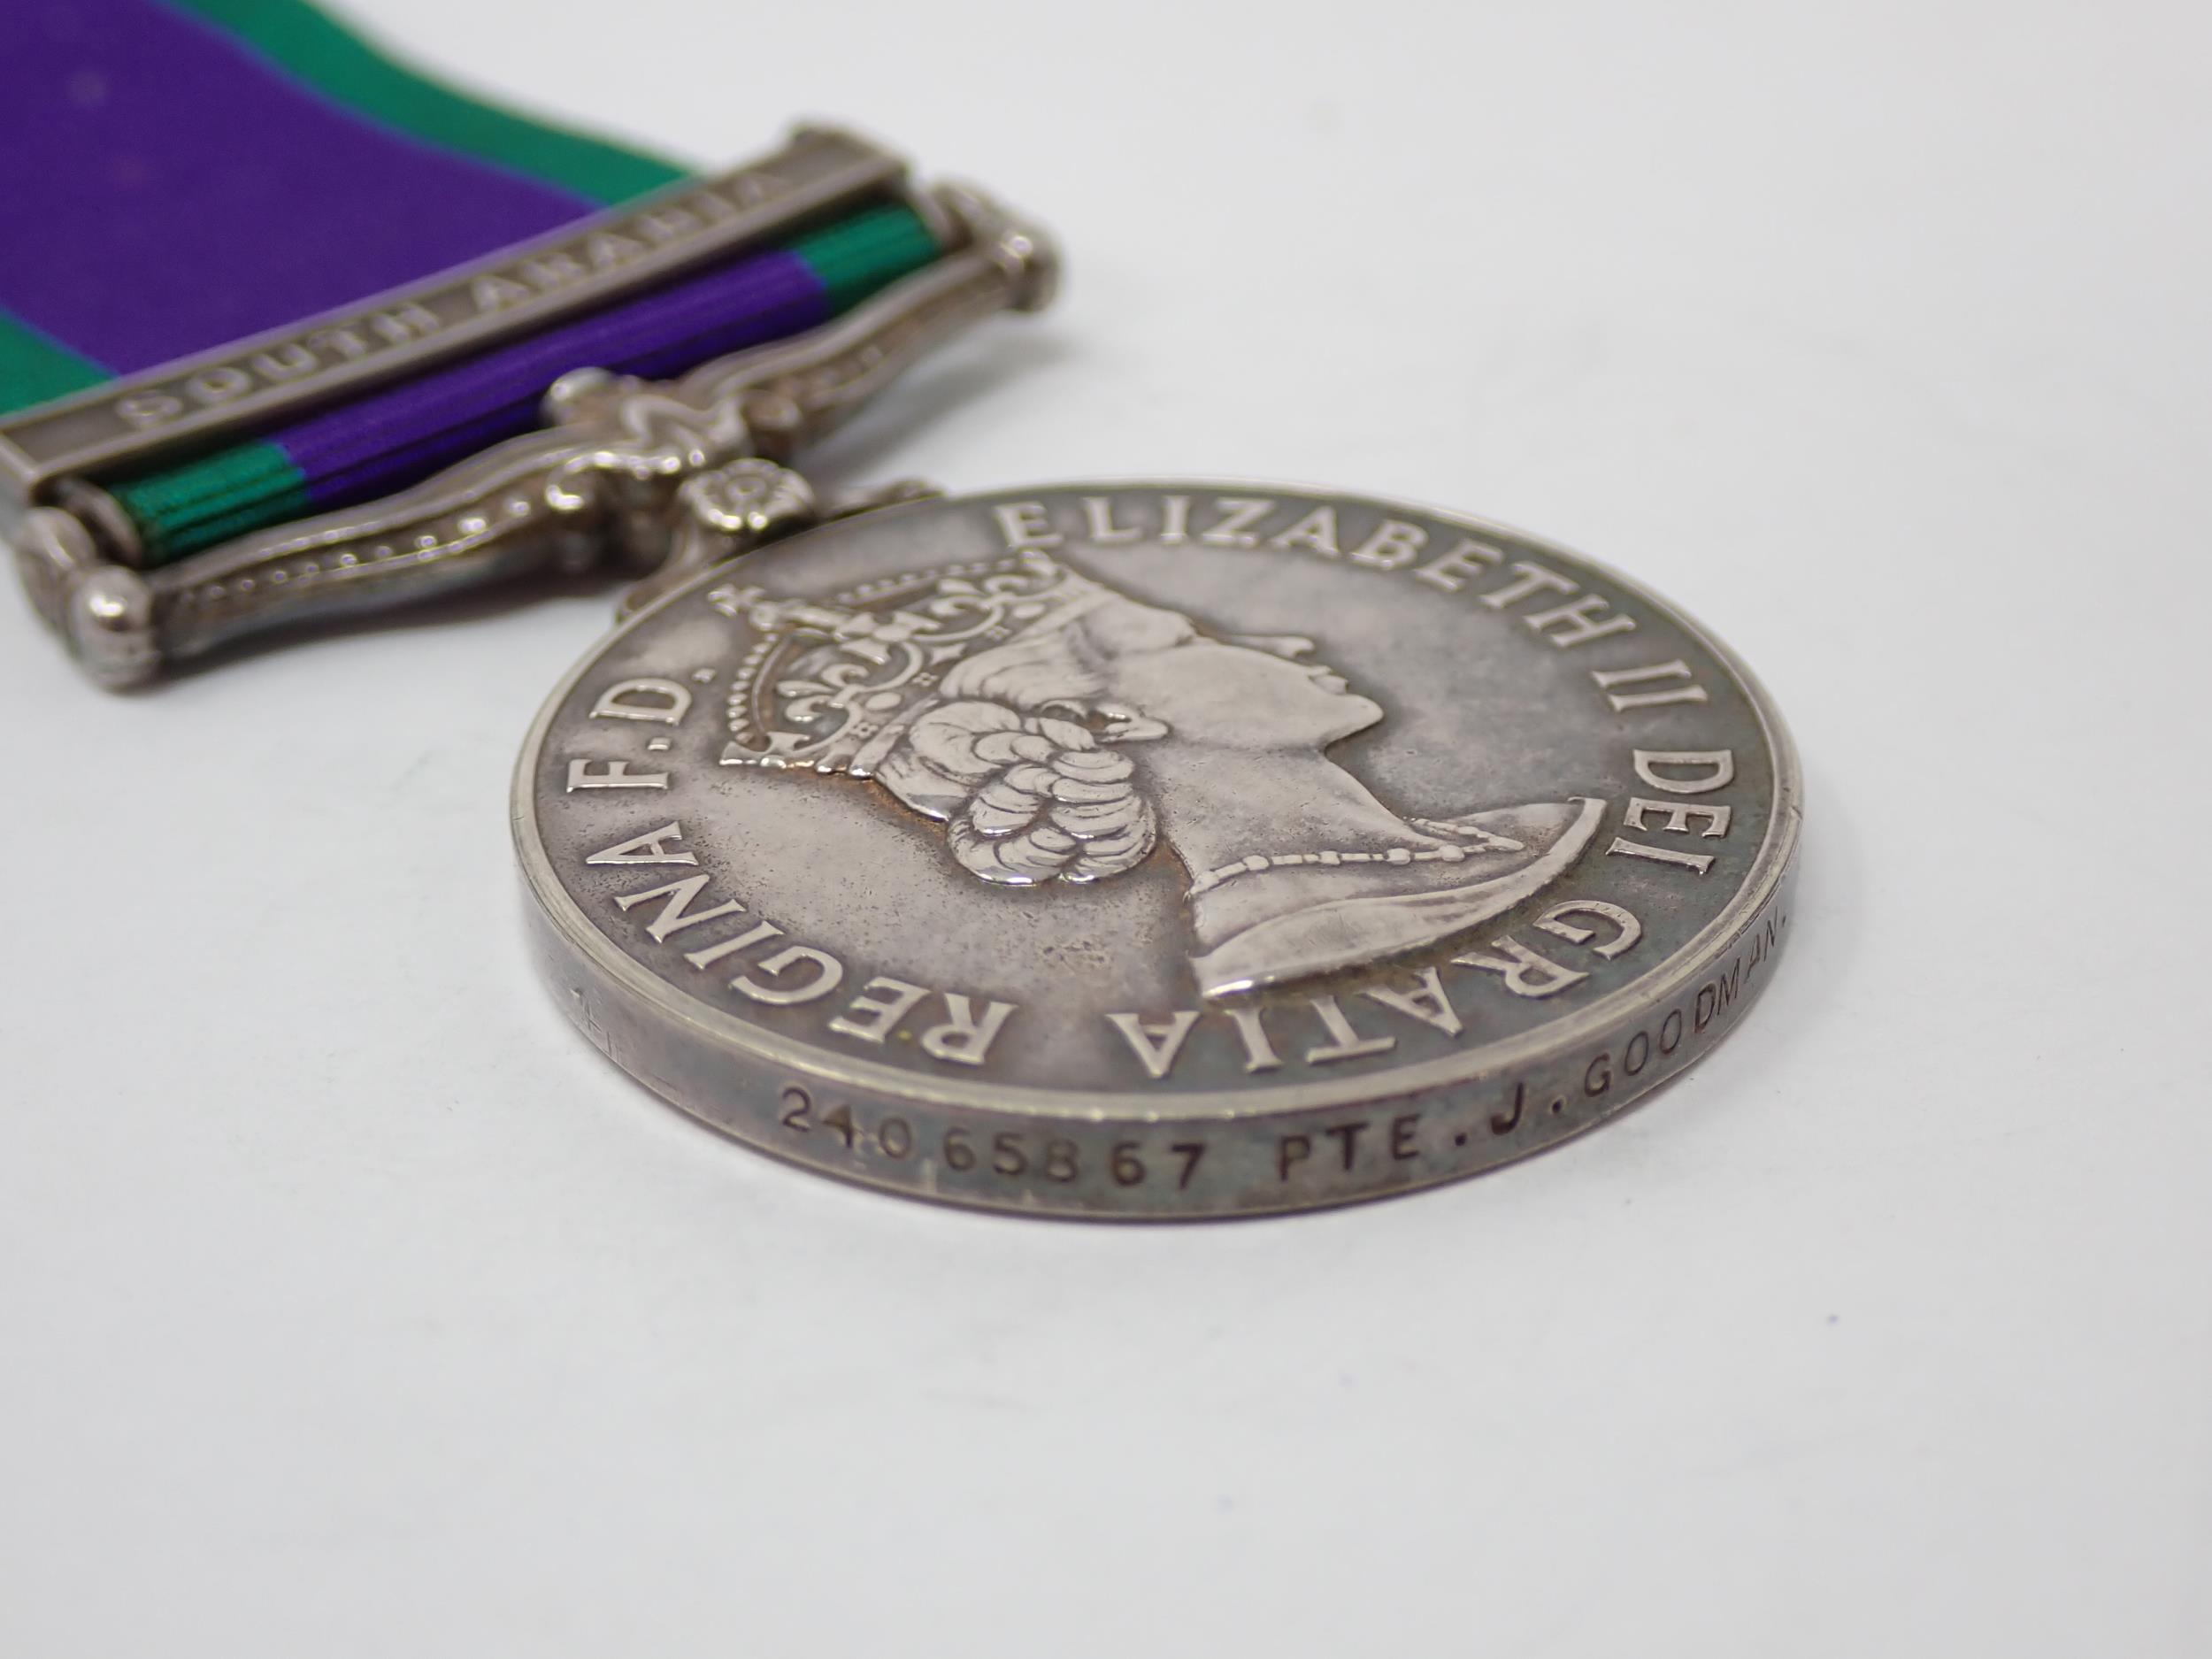 Campaign Service Medal with South Arabia Bar to 24065867 Private J. Goodman, Loyals, 'B' Company - Image 2 of 3